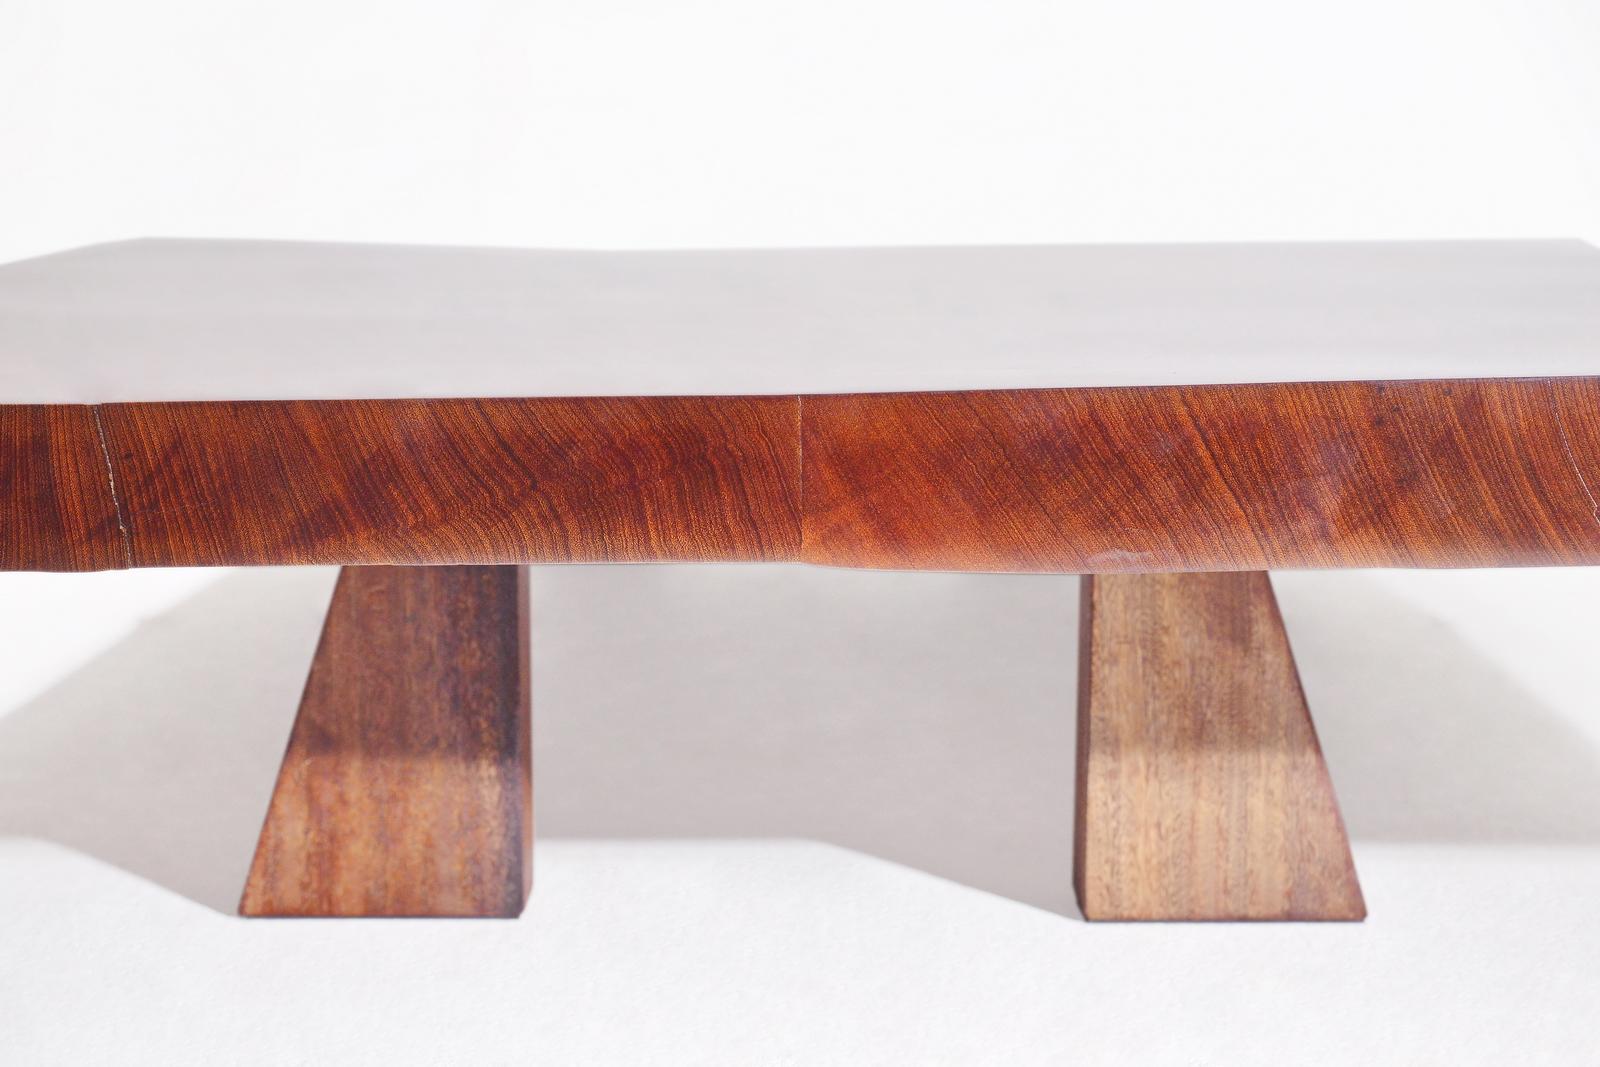 Bespoke Low Table, Antique Hardwood Slab and Wood Bases, by P. Tendercool For Sale 1